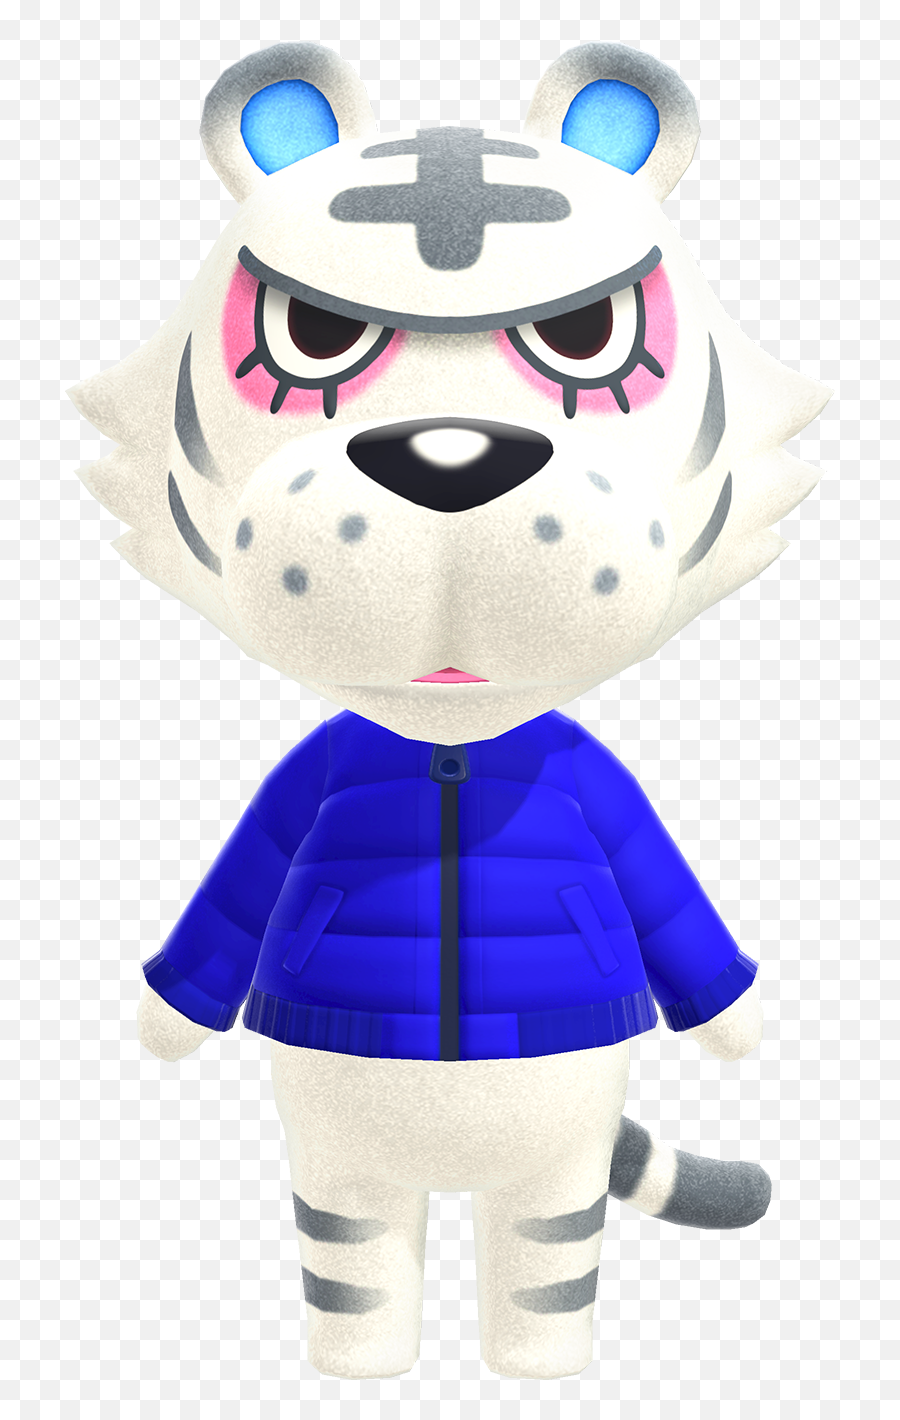 Rolf - Animal Crossing Wiki Nookipedia Rolf Animal Crossing Emoji,Does The Thumbs Up Emoticon Seem Rude